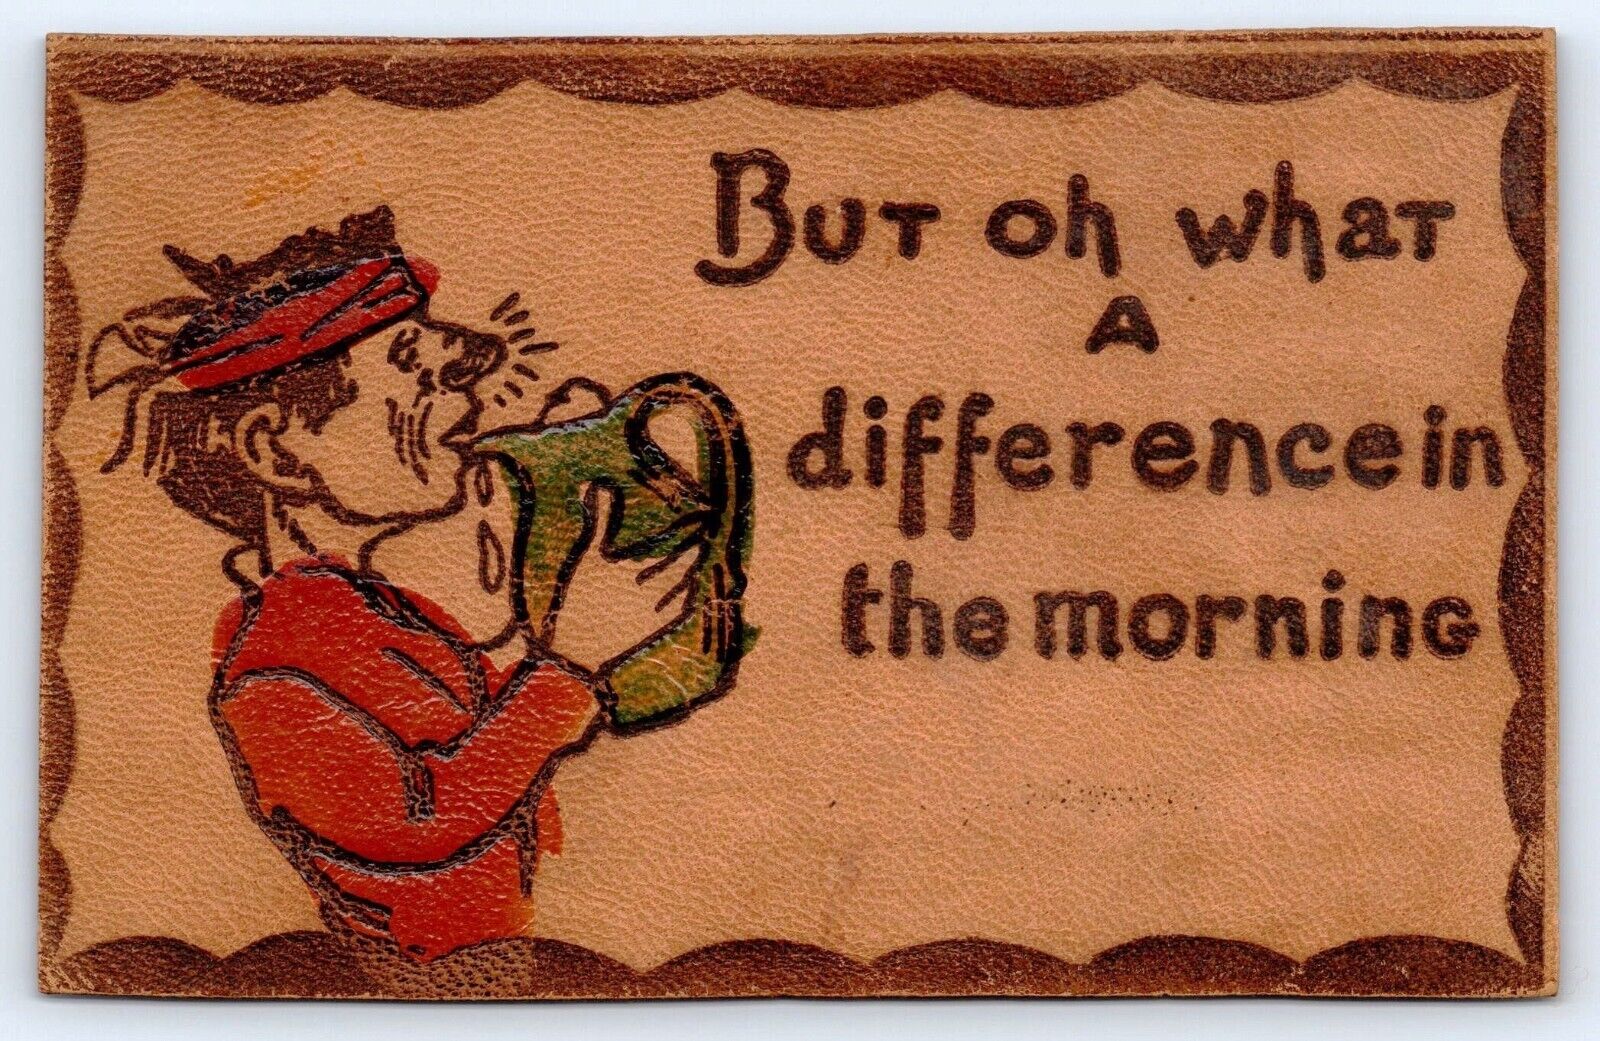 But Oh What a Difference in the Morning Hangover Leather Unposted Postcard